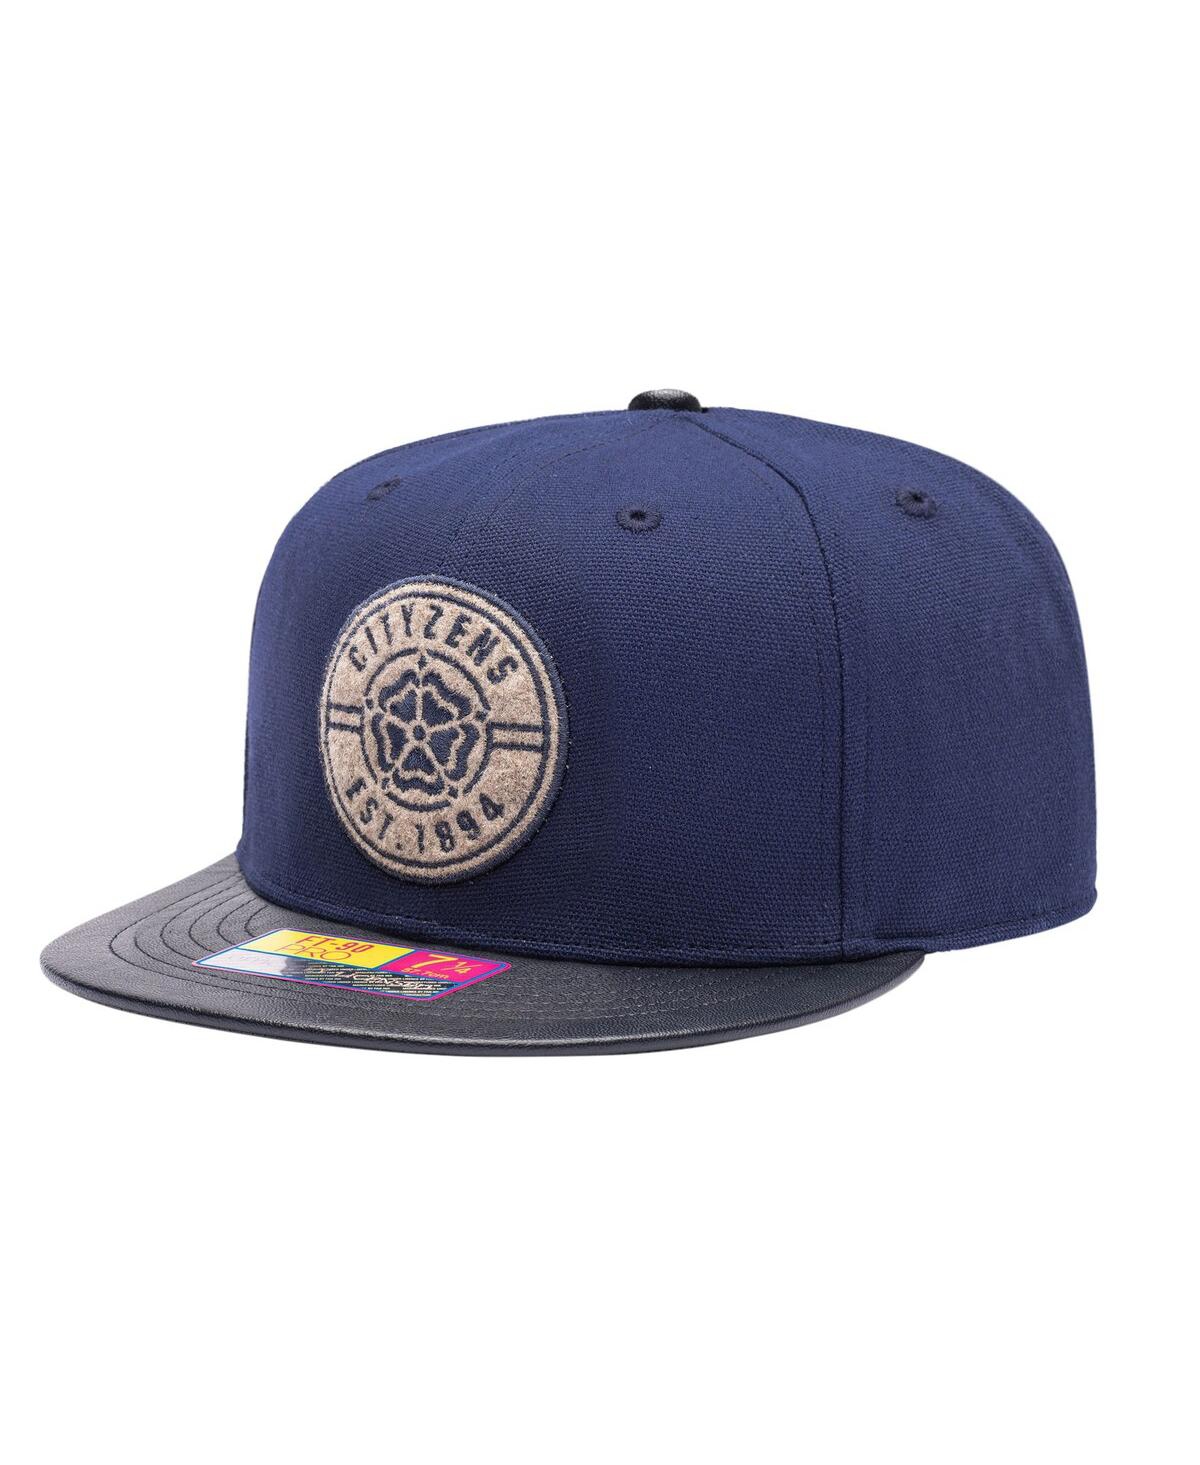 FAN INK MEN'S NAVY MANCHESTER CITY SWATCH FITTED HAT